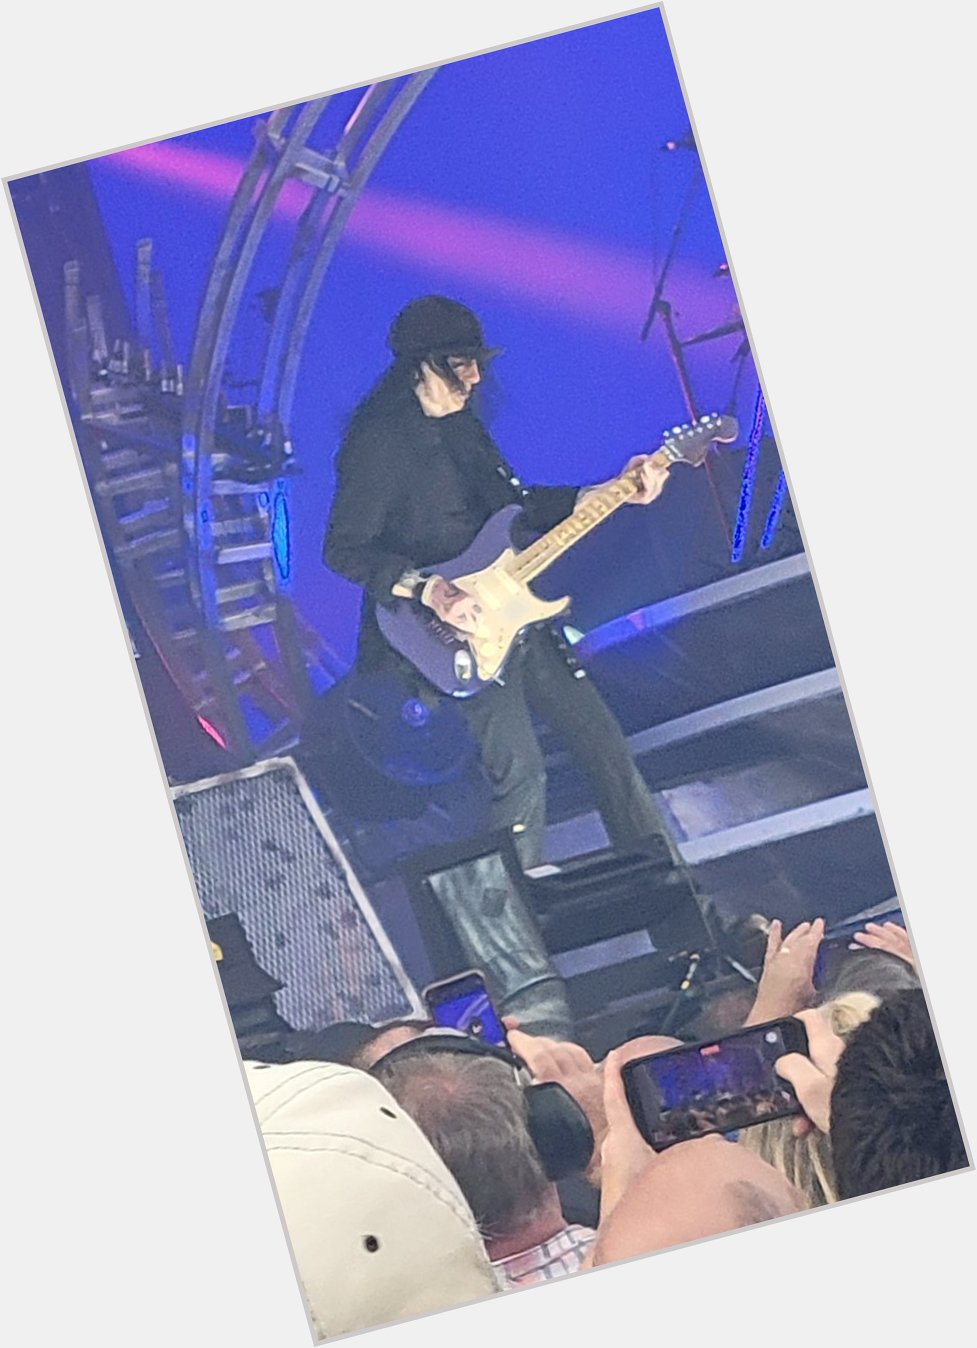  Happy birthday to Mick. MARS!! I took this picture last year in Hershey, PA 